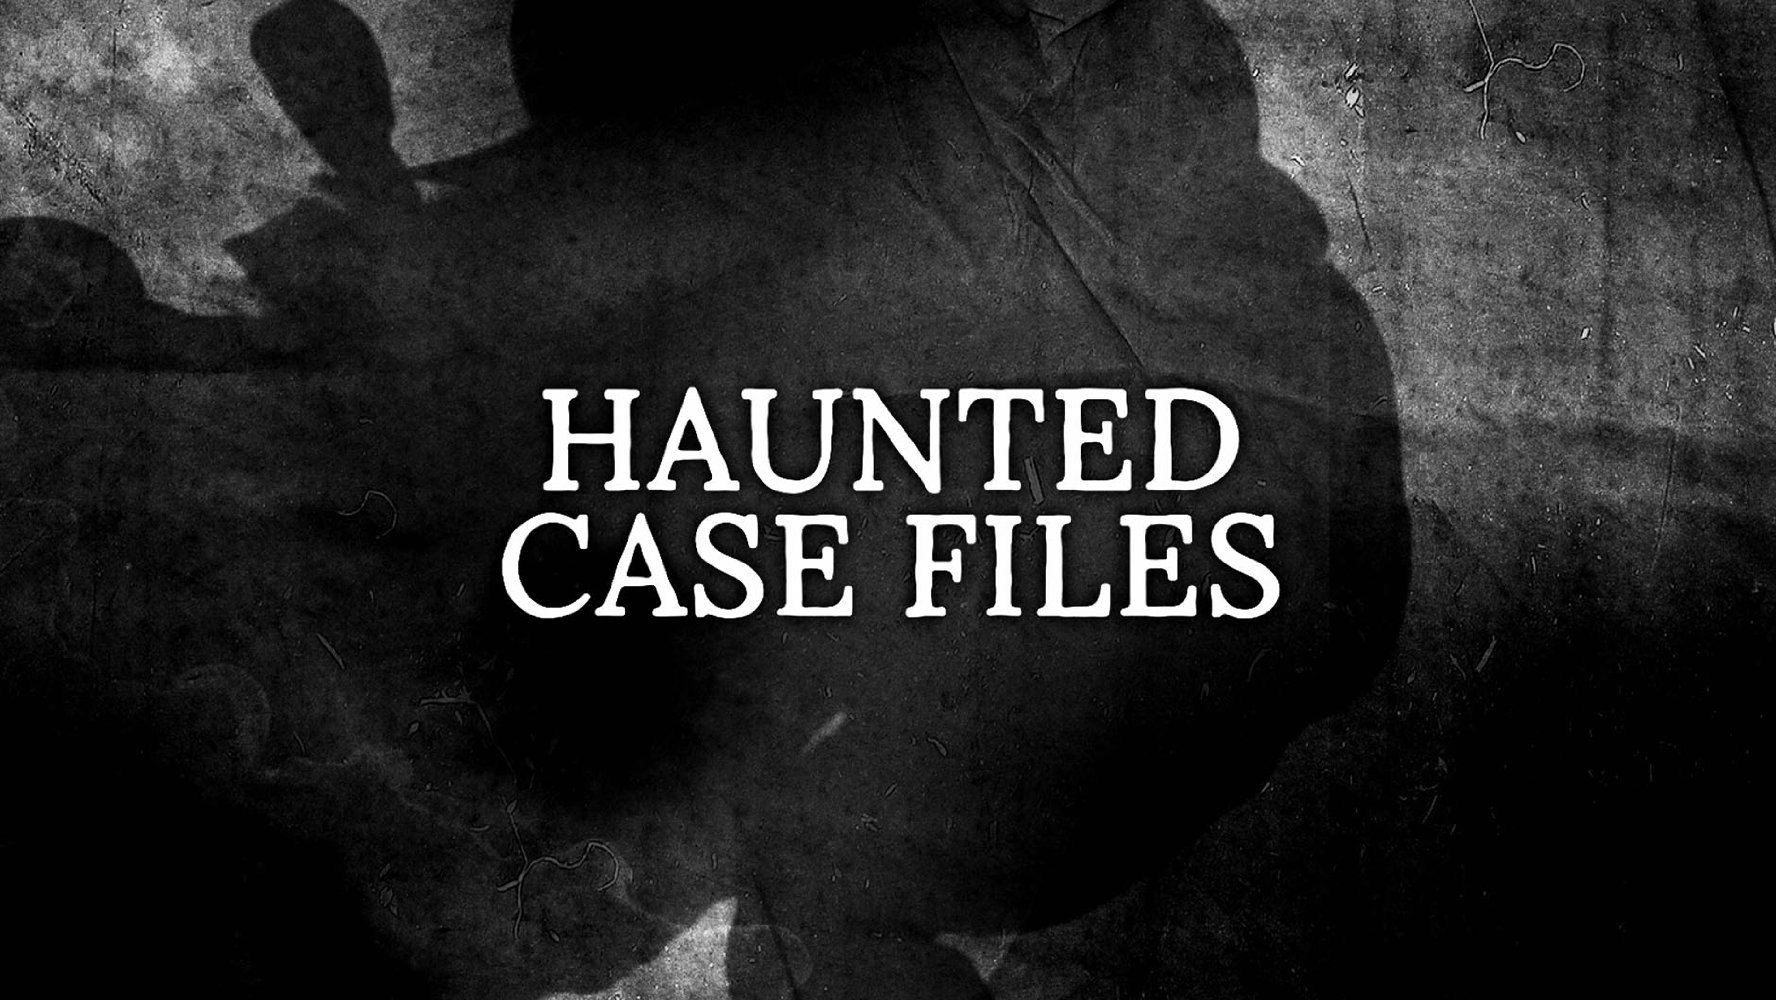 Haunted Case Files: The Paranormal through the Eyes of the Investigators